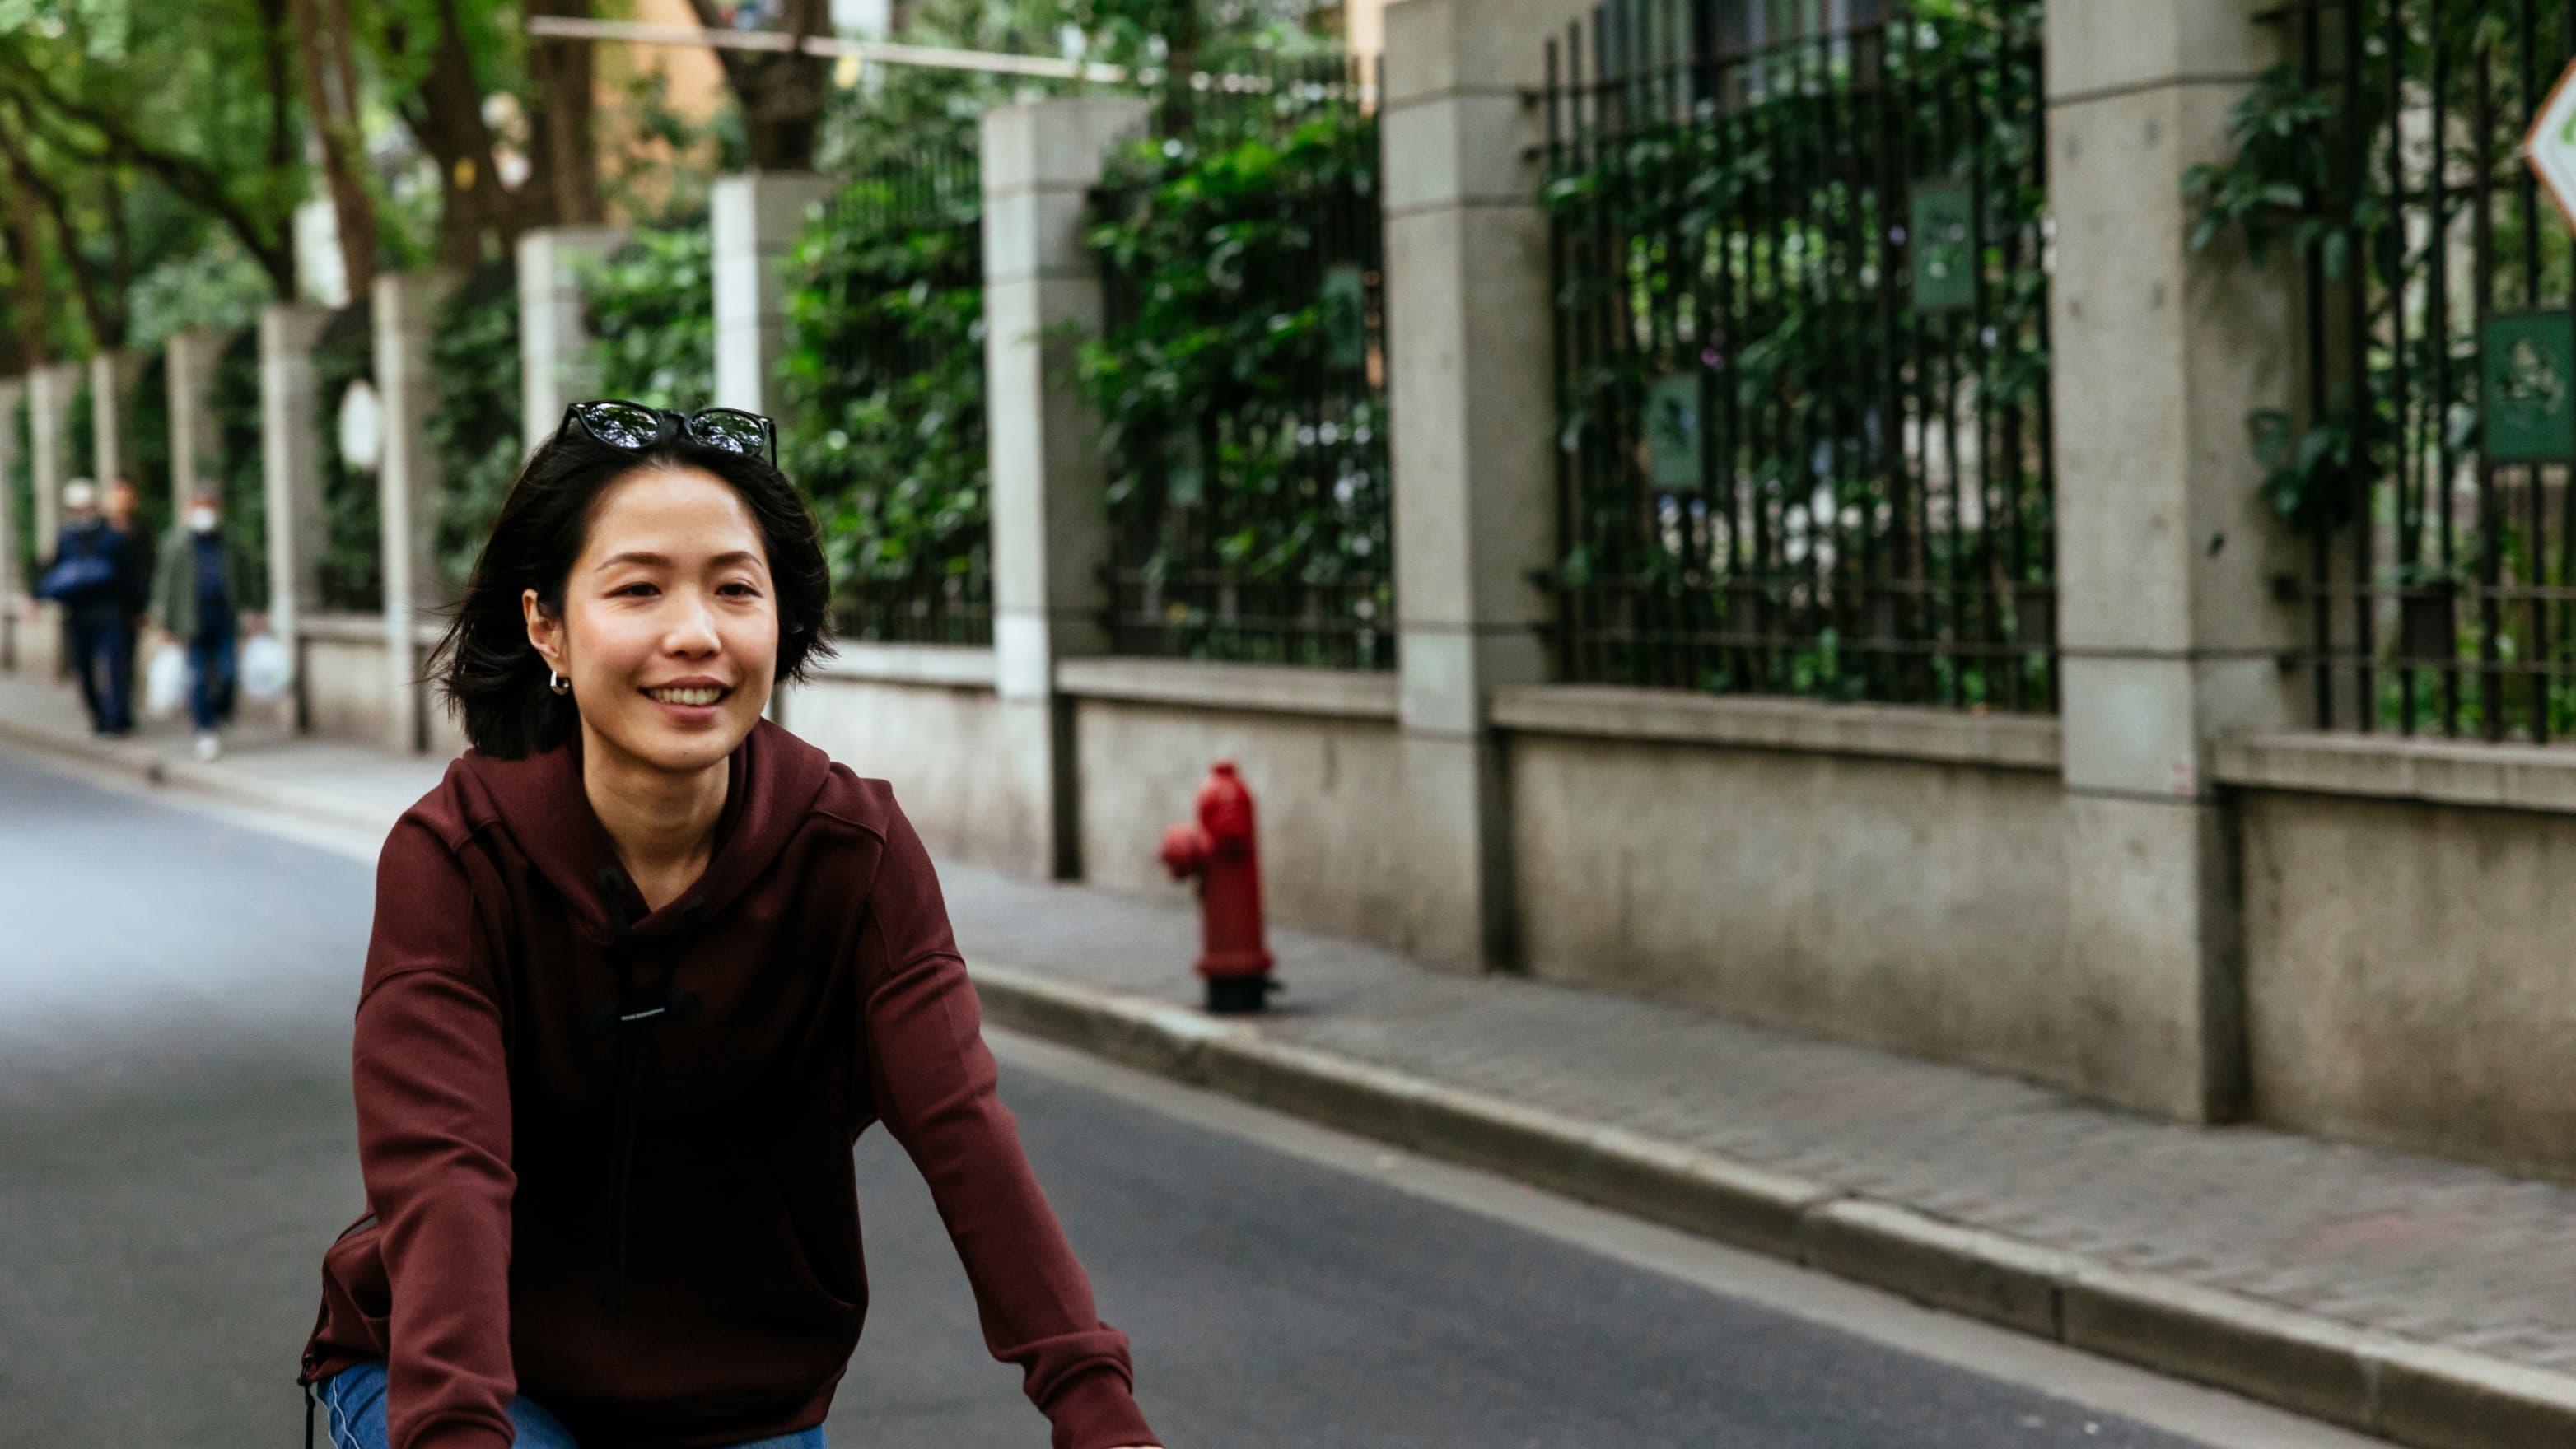 Woman smiles as she rides her bike down a city street